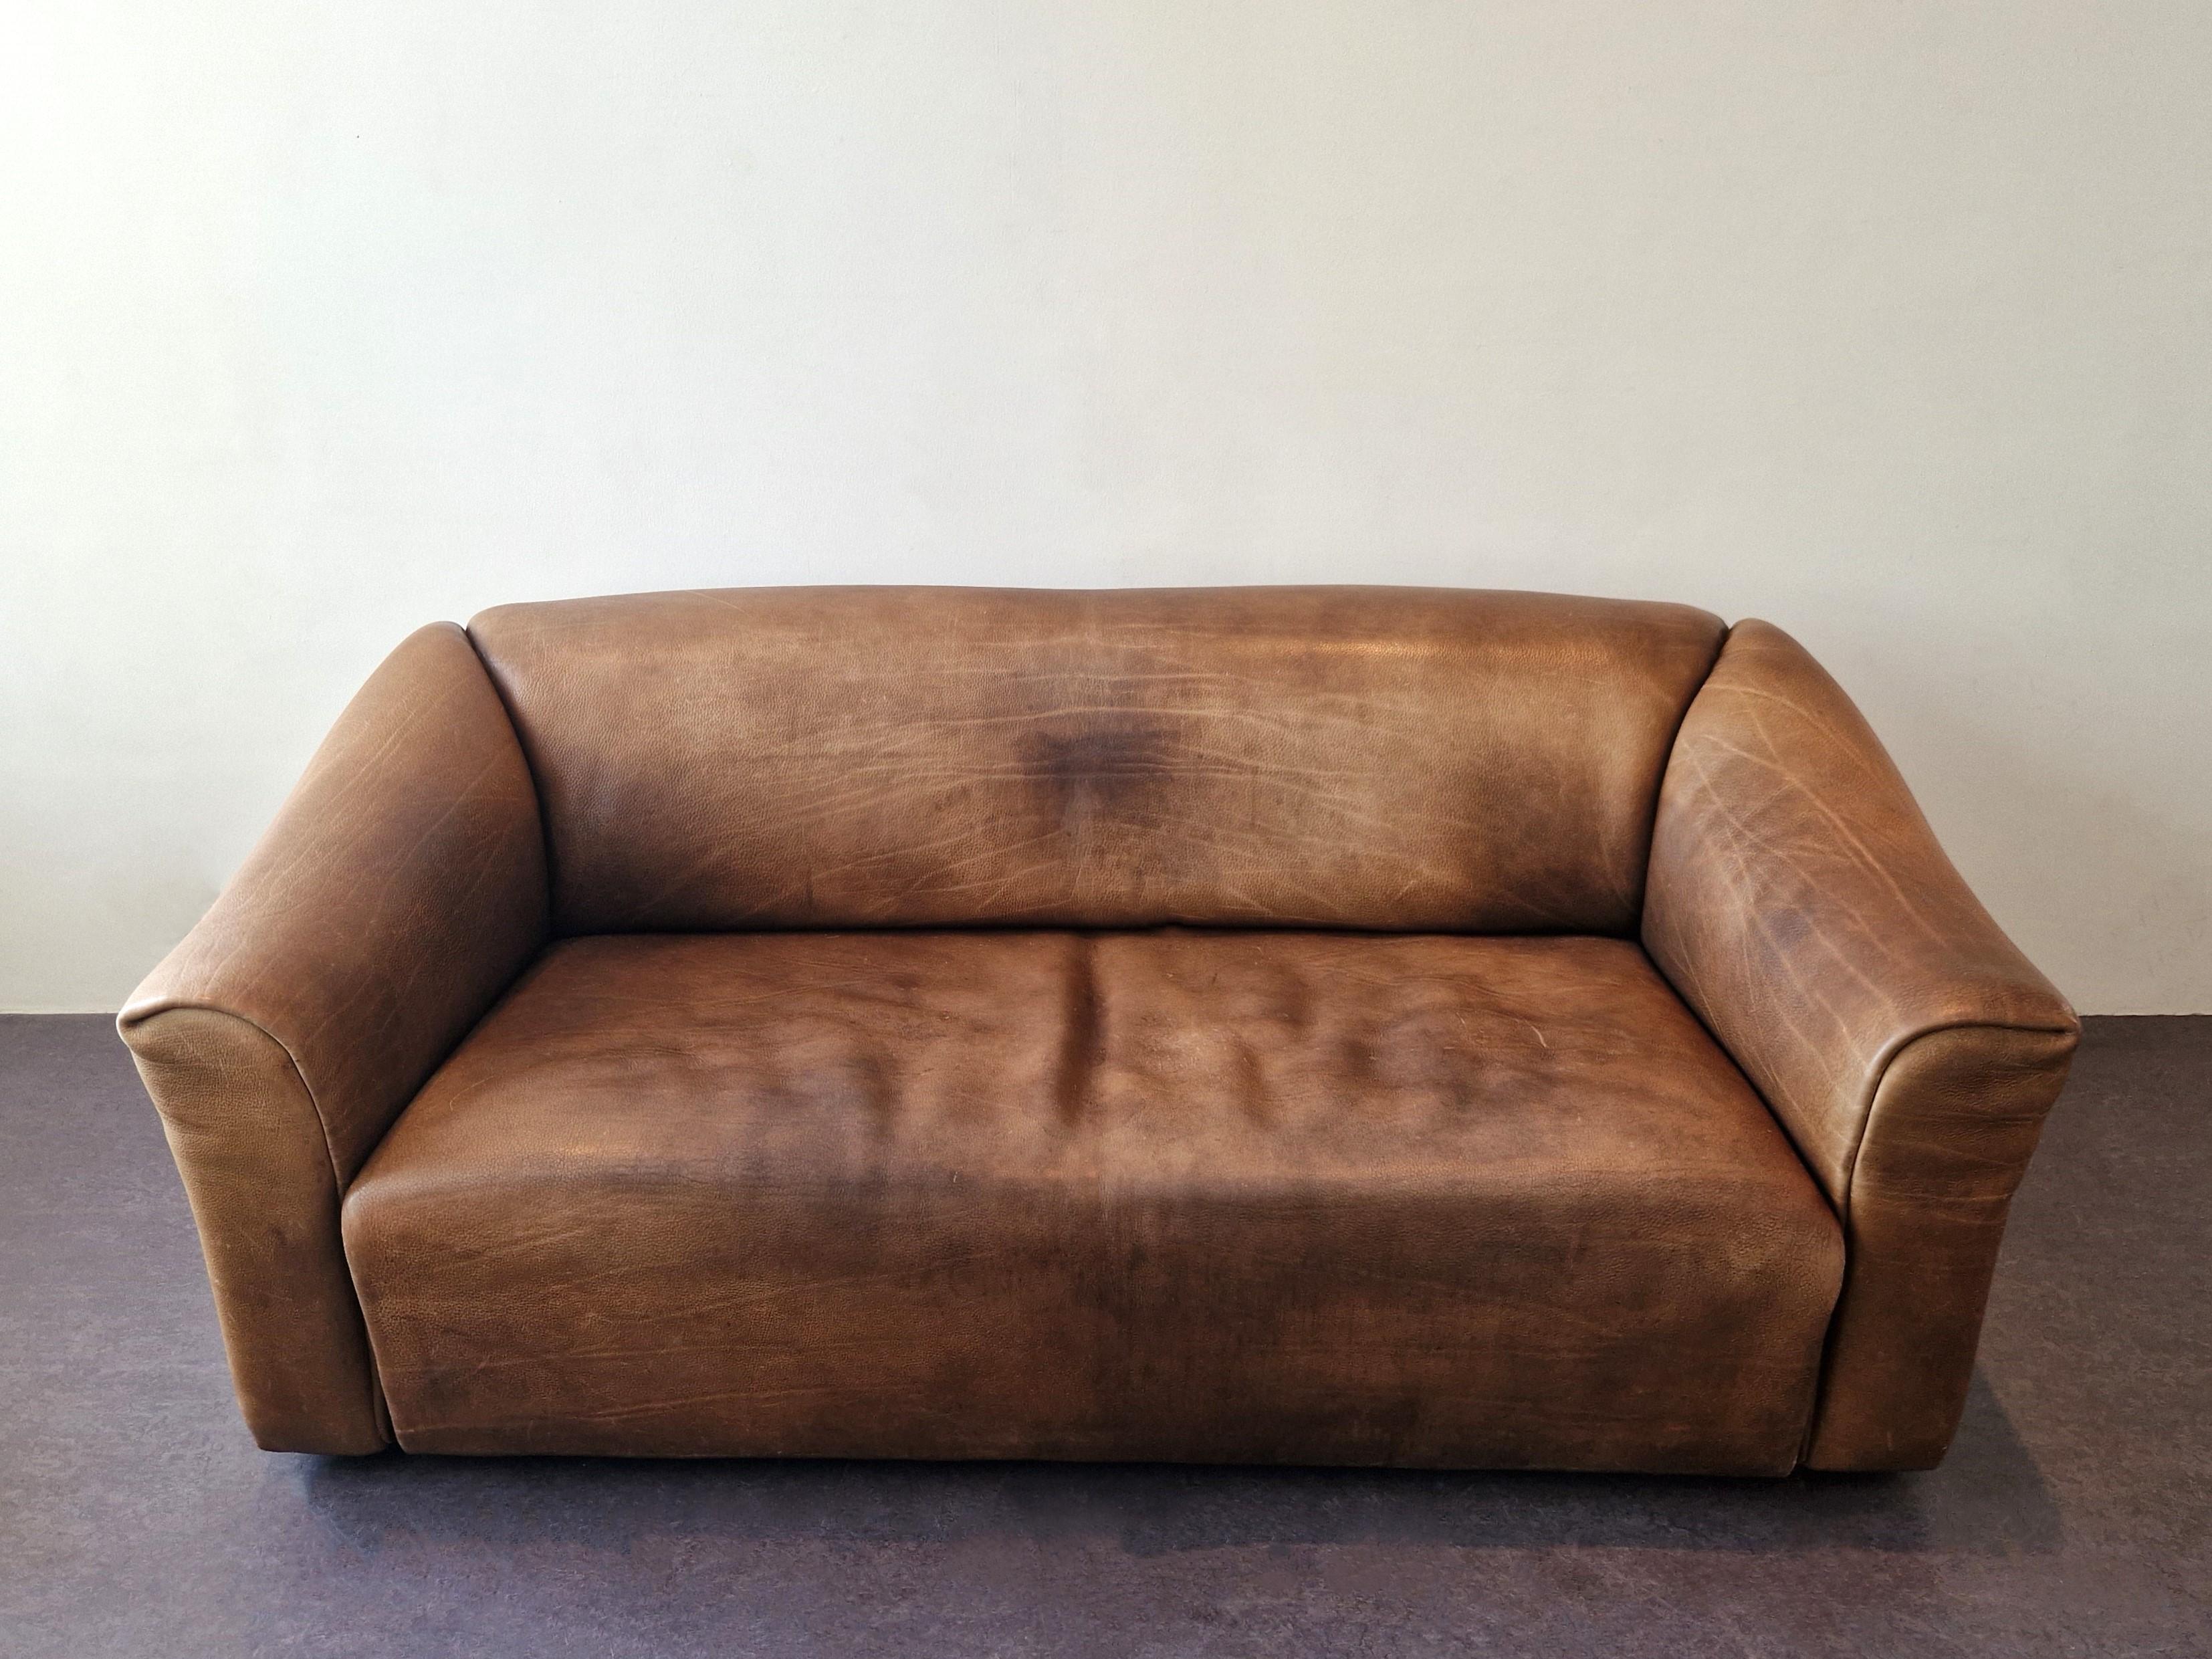 Swiss DS-47 brown leather three-seater sofa by De Sede, Switzerland, 1970's